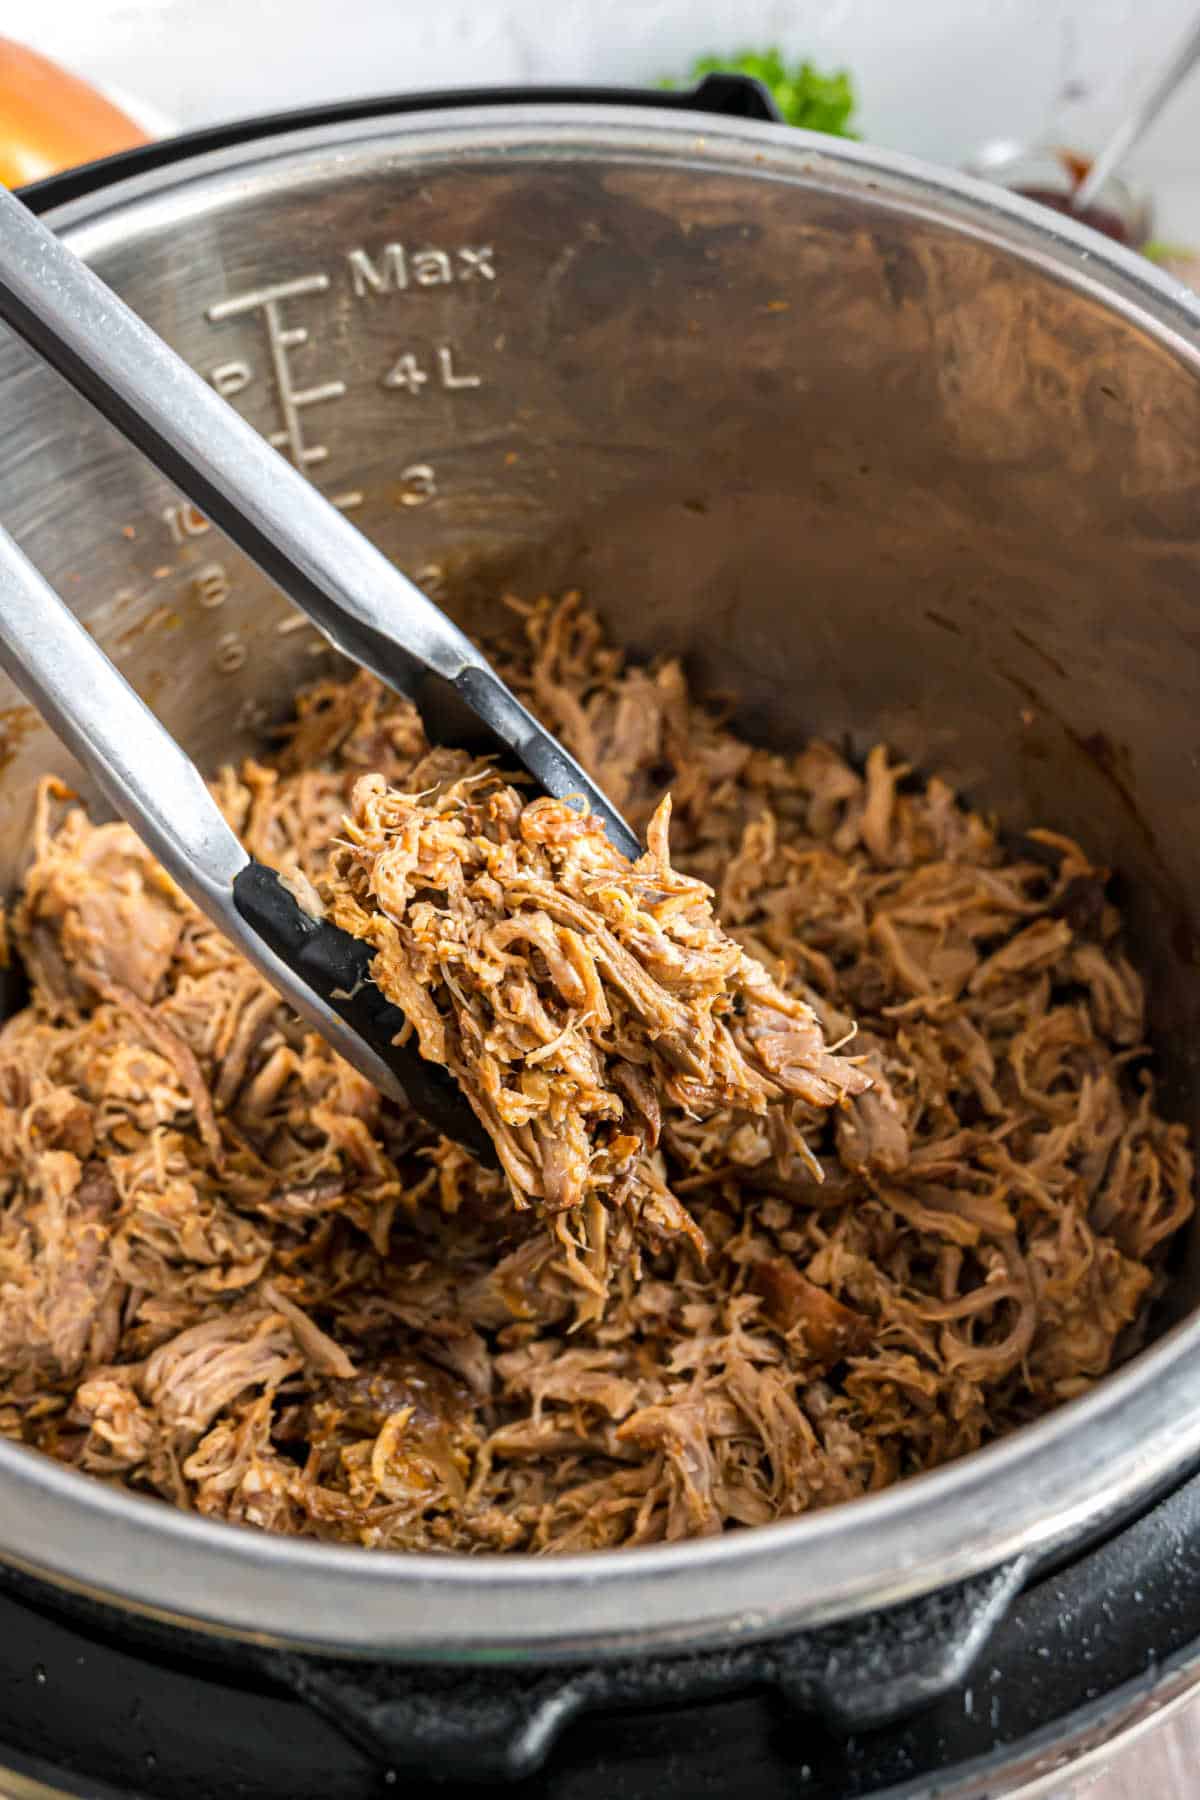 Shredded pork in the Instant Pot with tongs pulling it up.